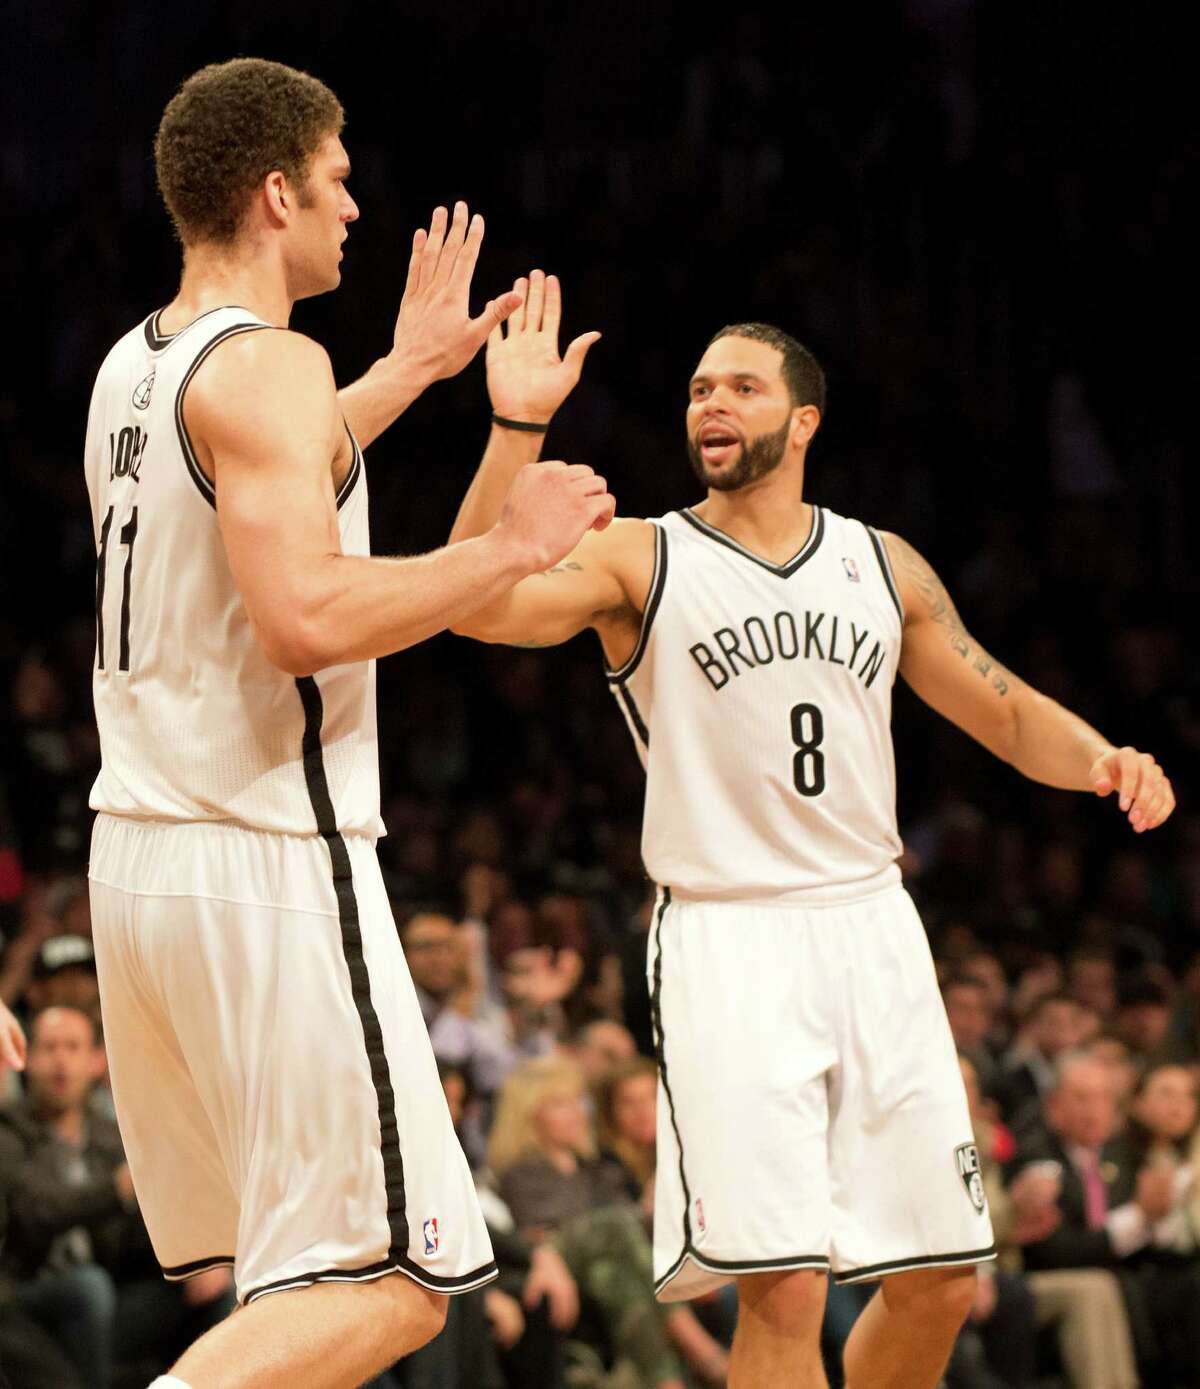 Brooklyn Nets Deron Williams (8) and Brook Lopez (11) celebrate against the Chicago Bulls during game five of their first round NBA playoff game April 29, 2013 at the Barclay Center in New York. AFP PHOTO/Don EmmertDON EMMERT/AFP/Getty Images